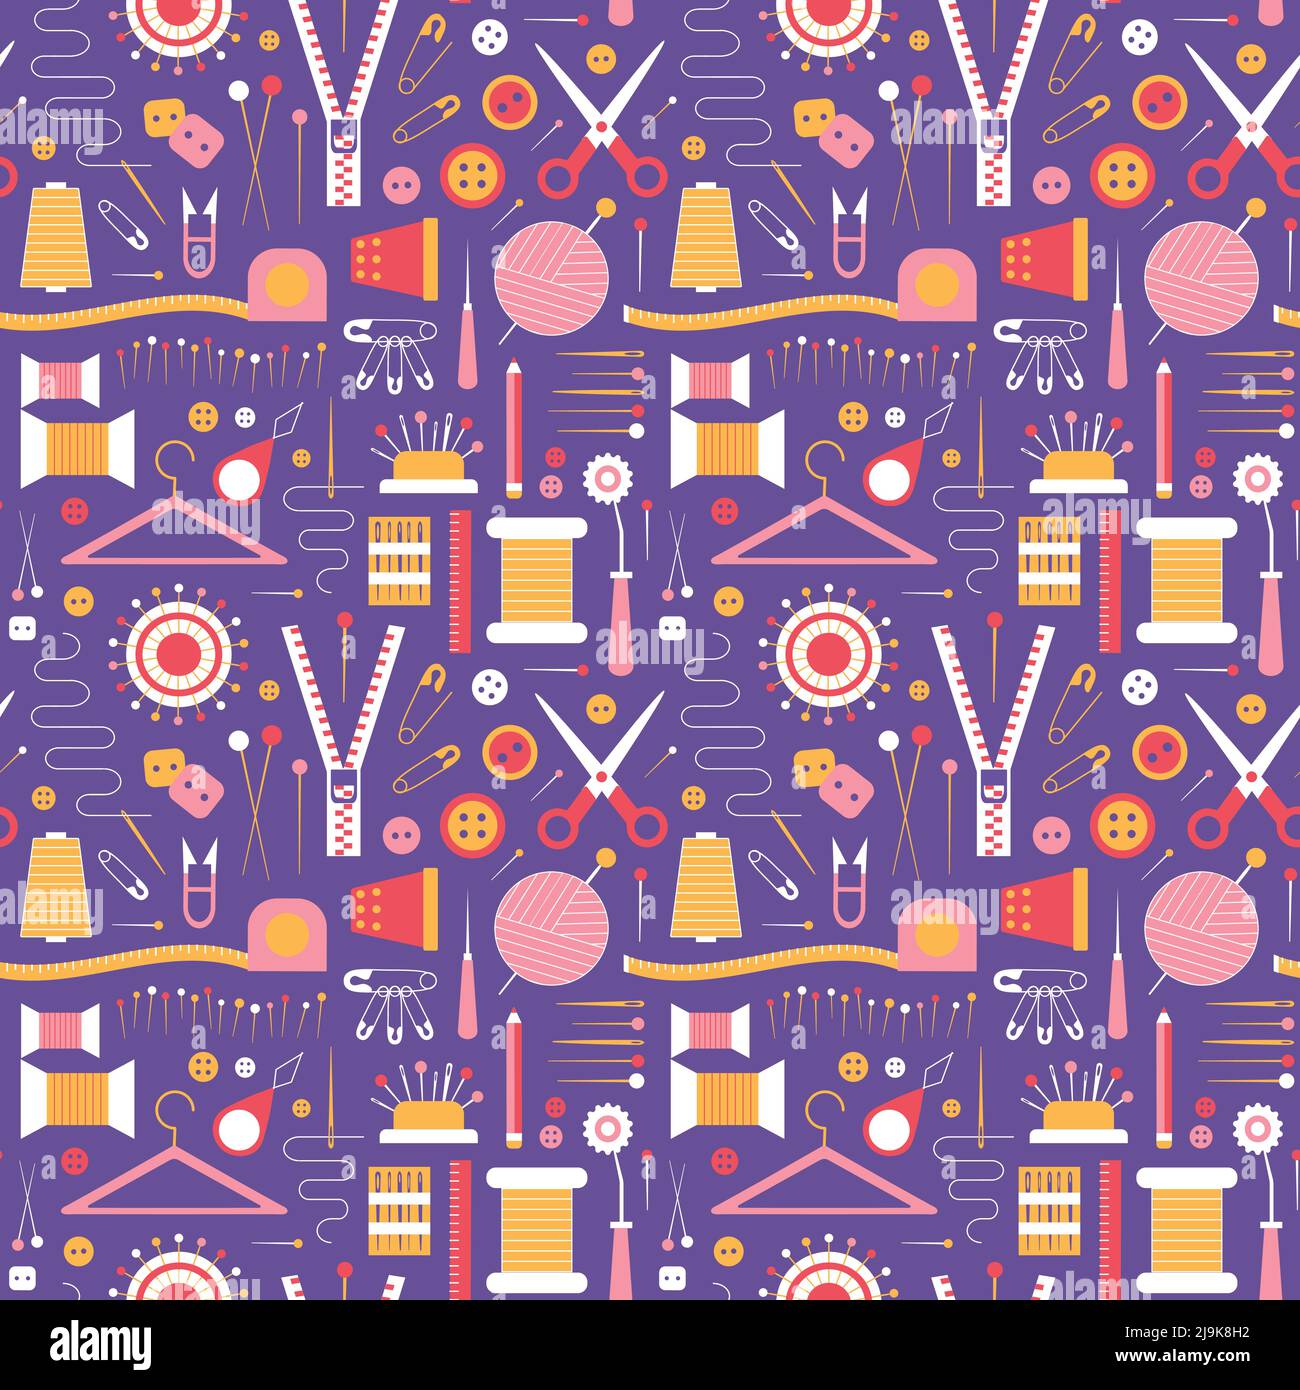 Sewing Hobby Tools and Supplies Seamless Pattern Stock Vector